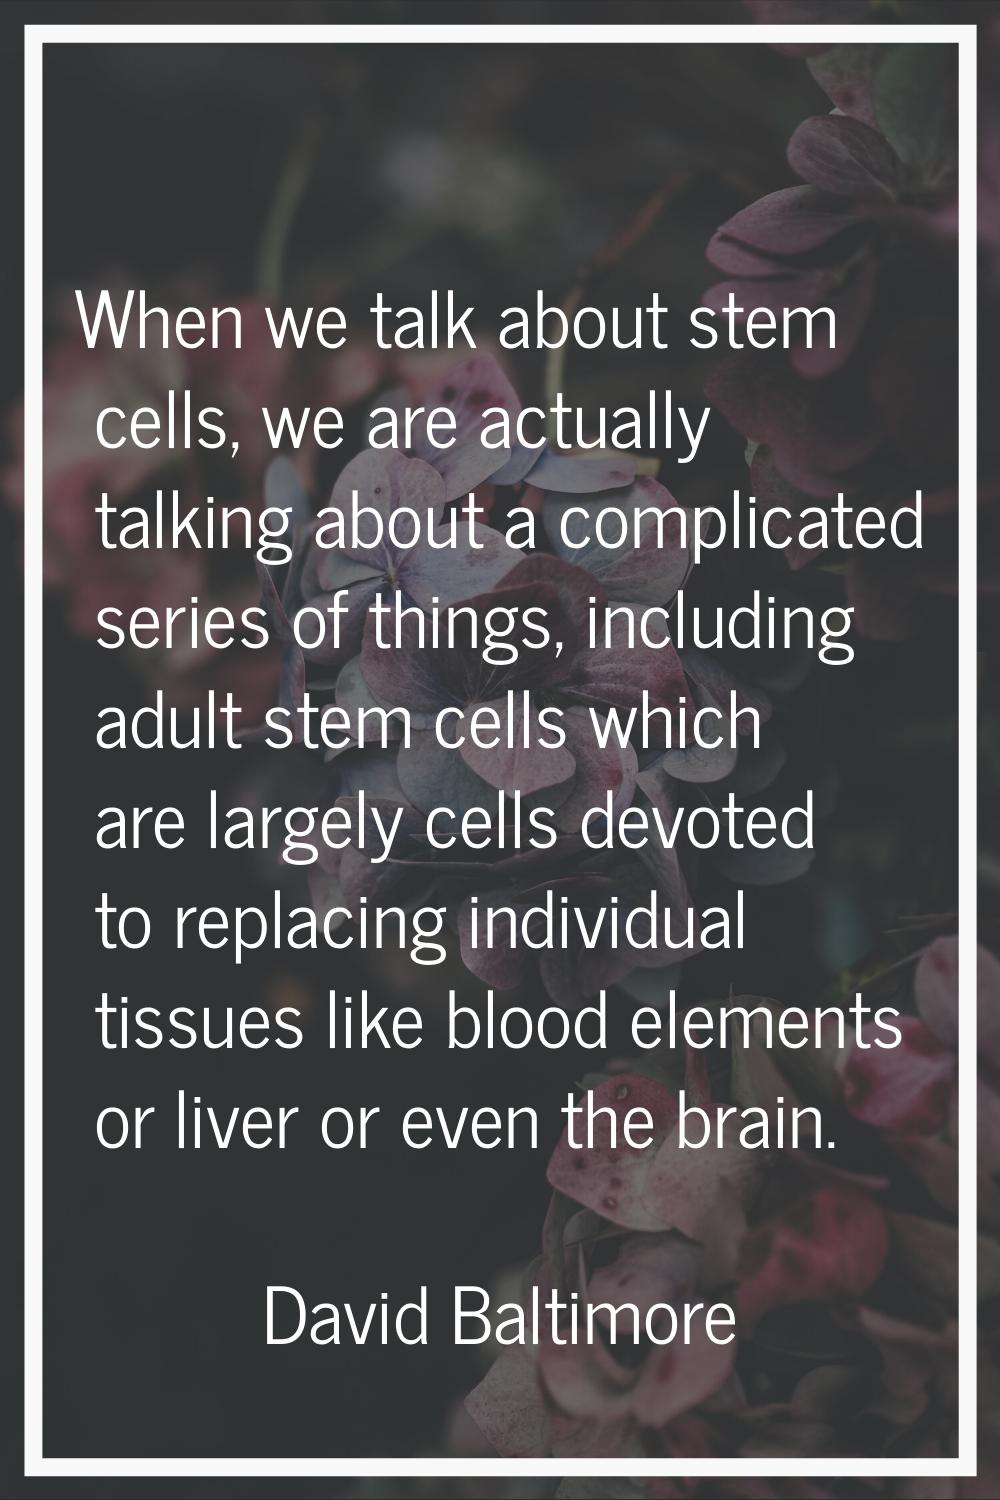 When we talk about stem cells, we are actually talking about a complicated series of things, includ